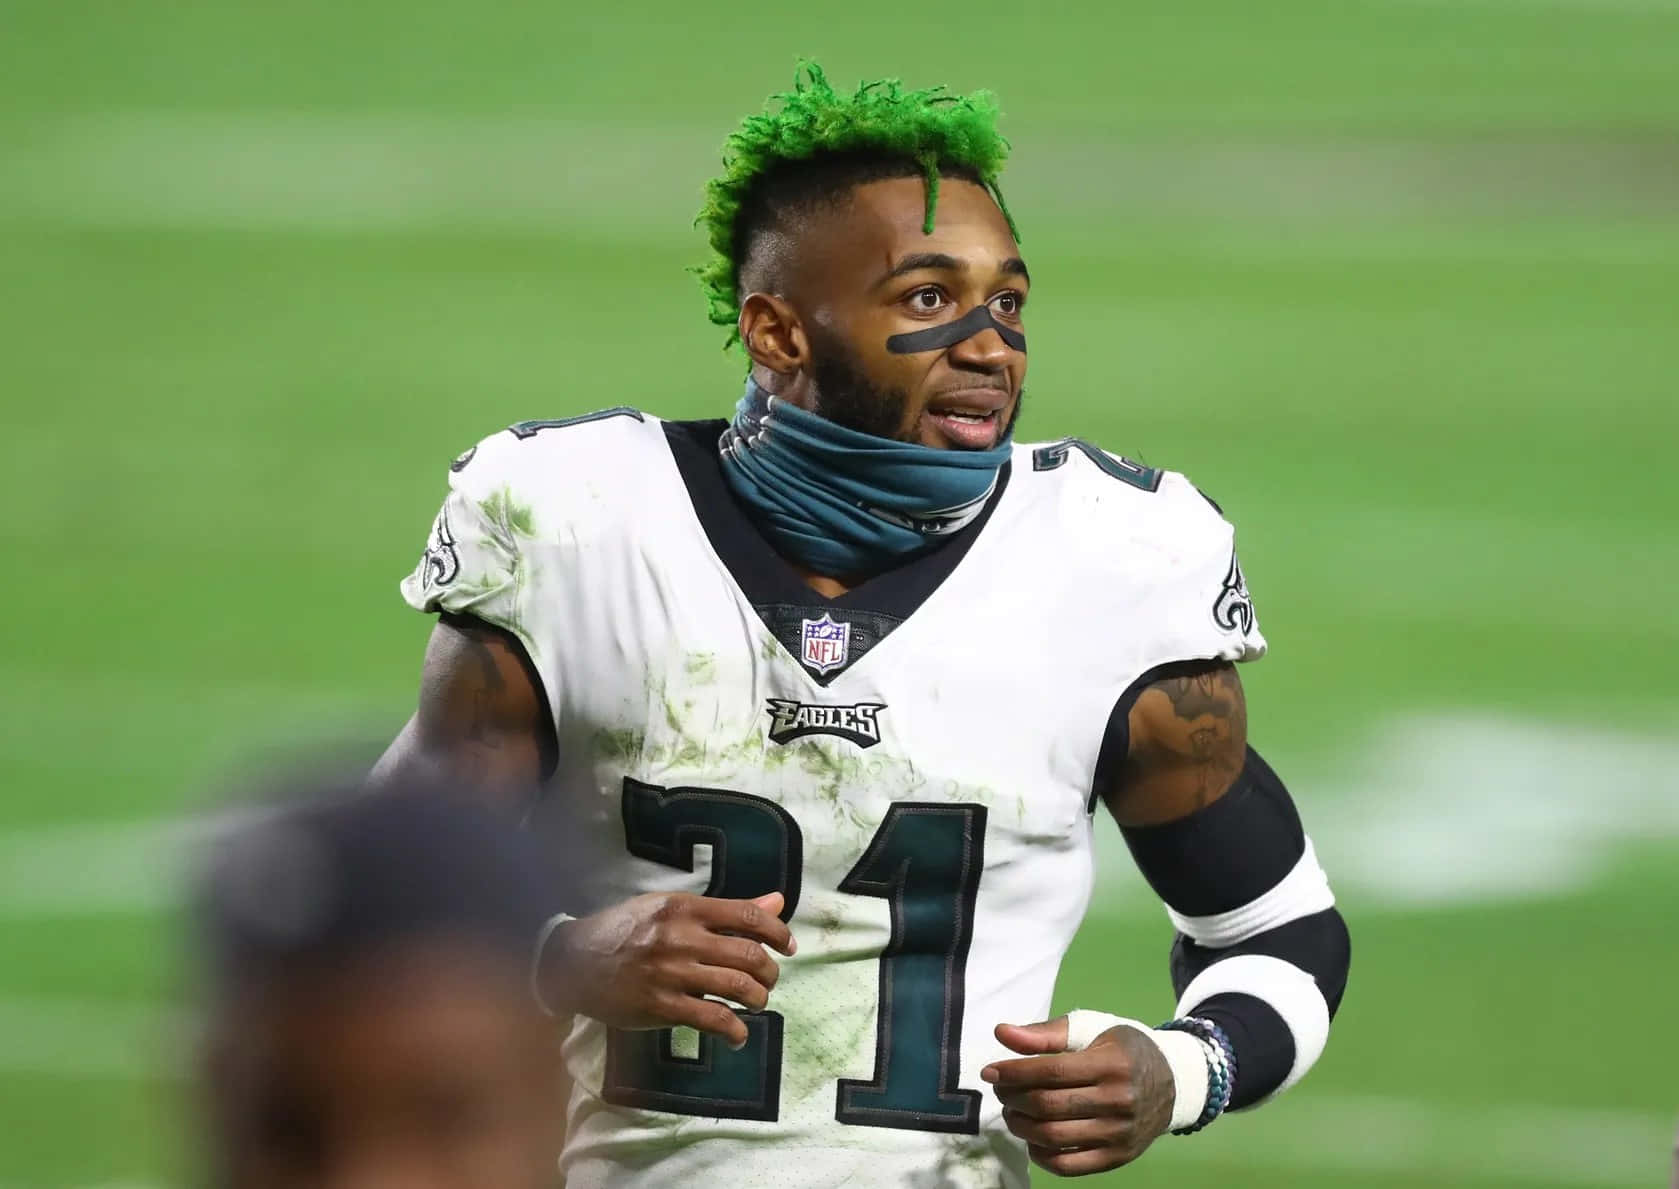 Green Haired Football Player Number21 Wallpaper